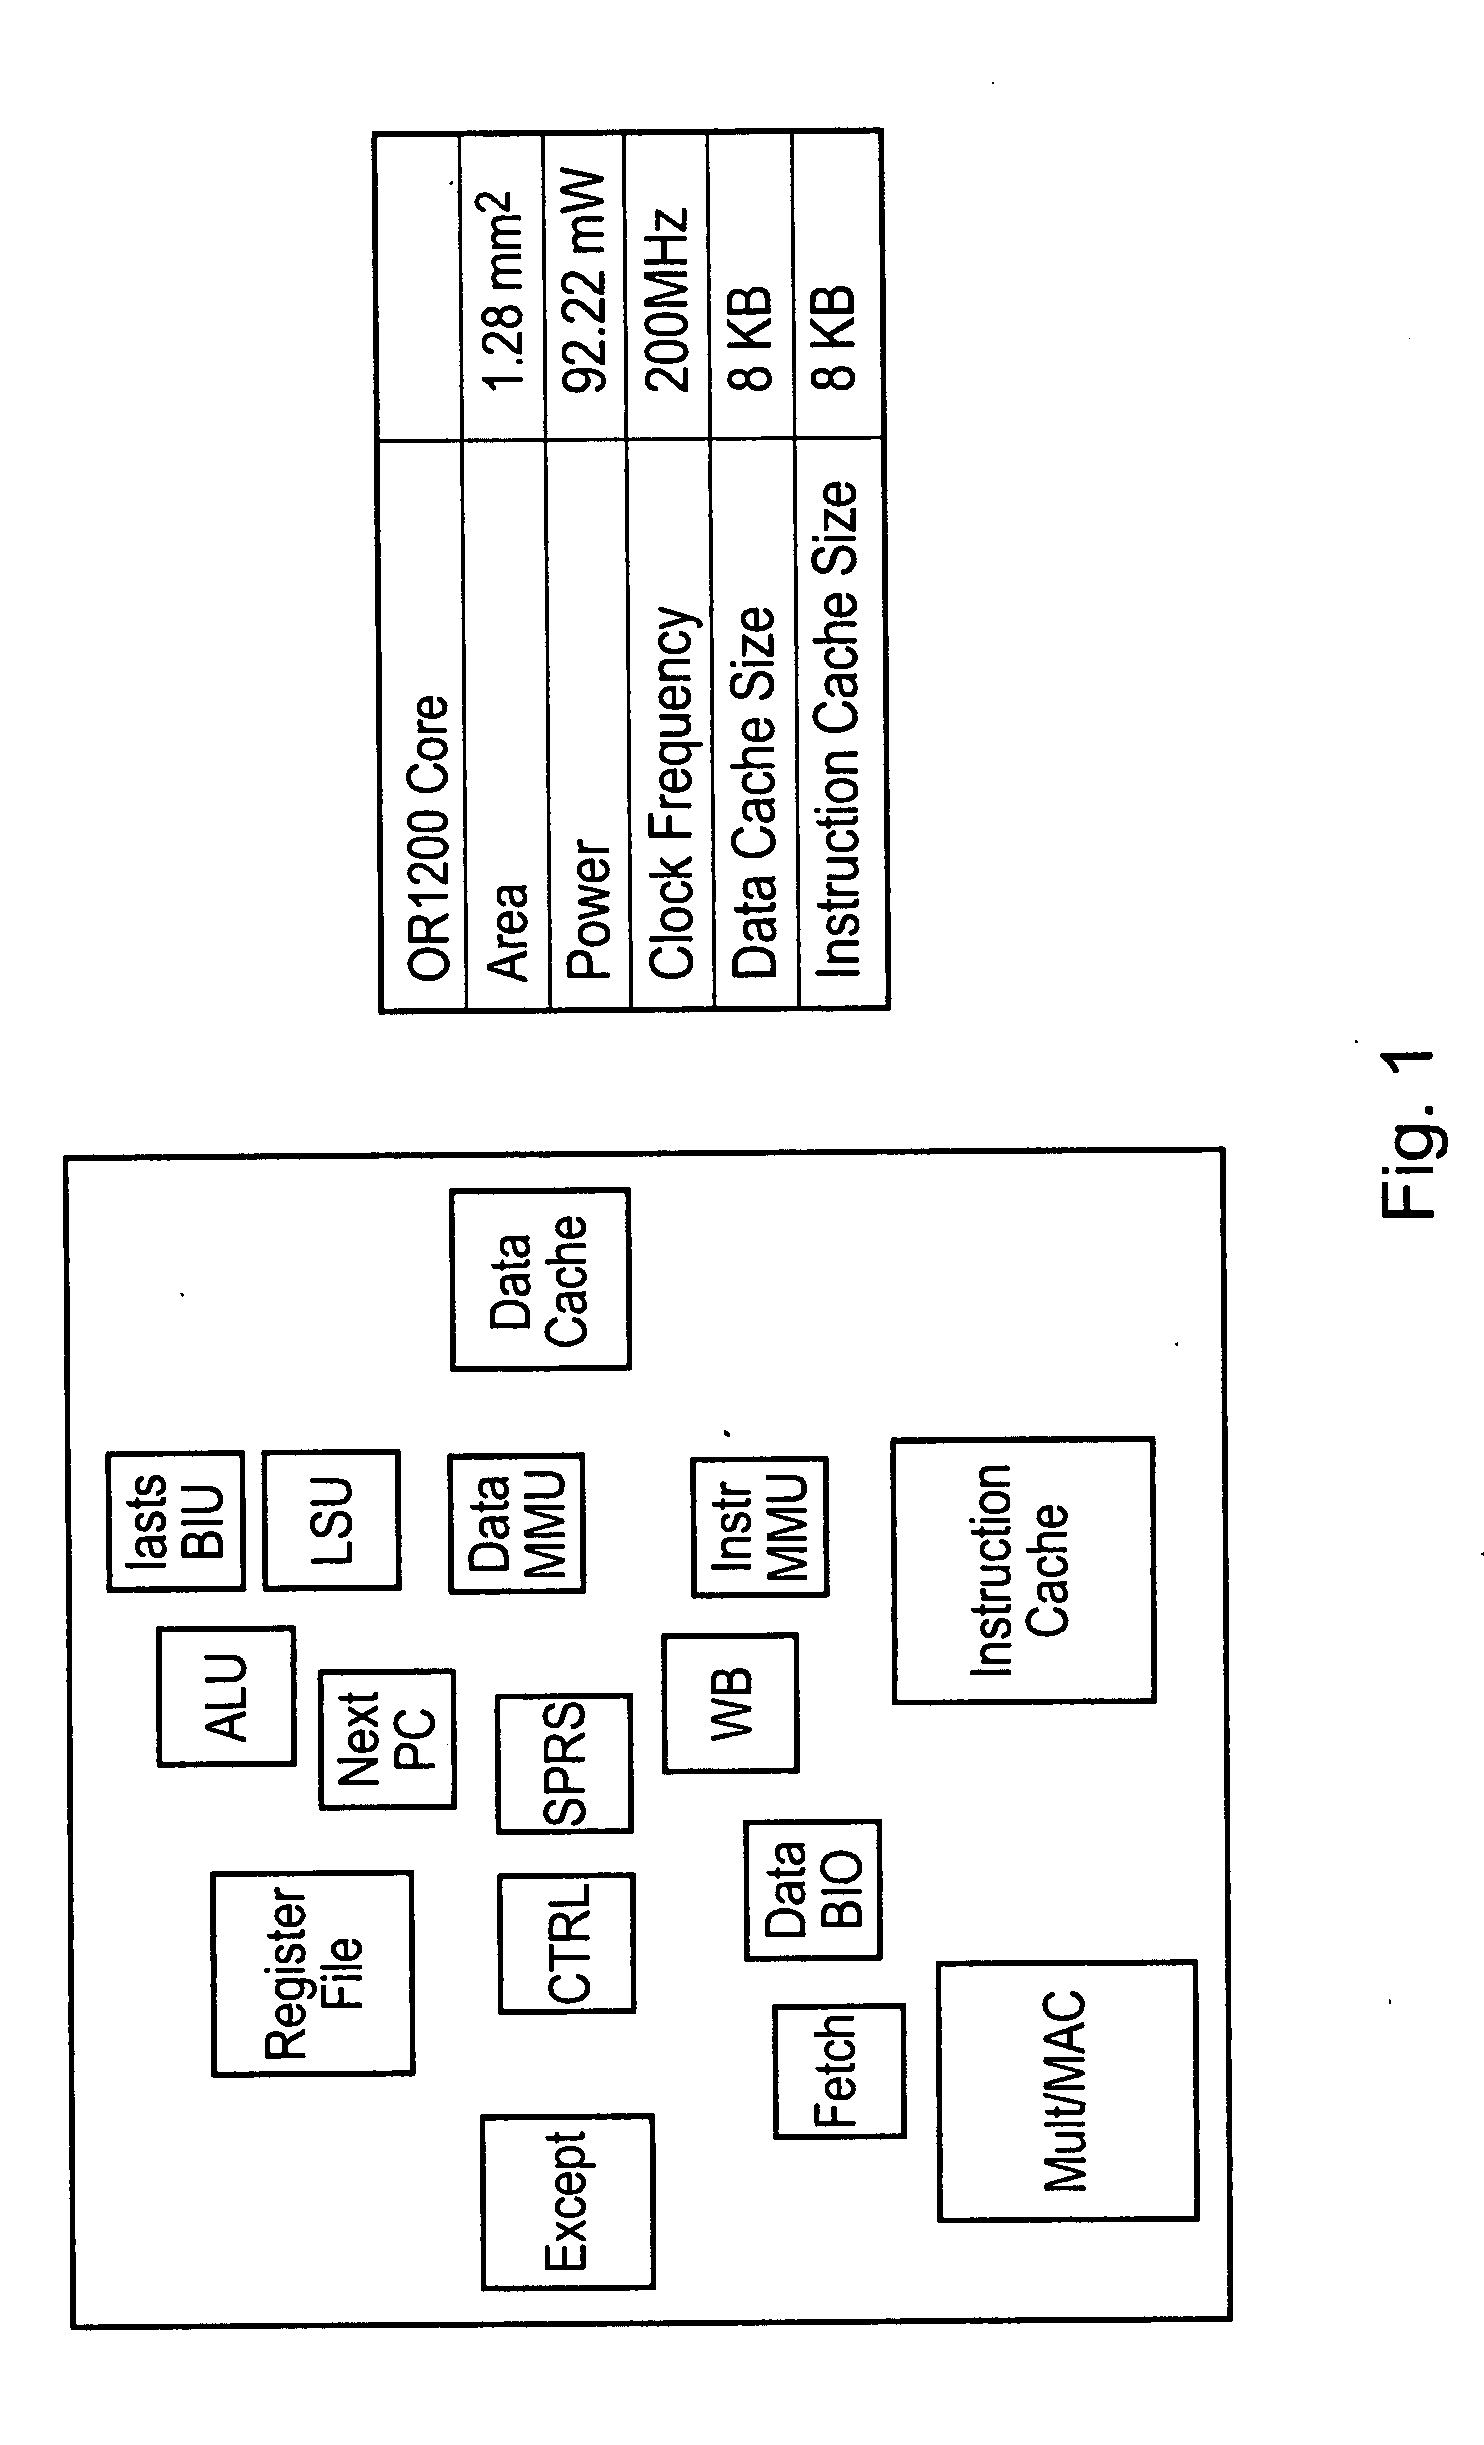 Integrated circuit wearout detection